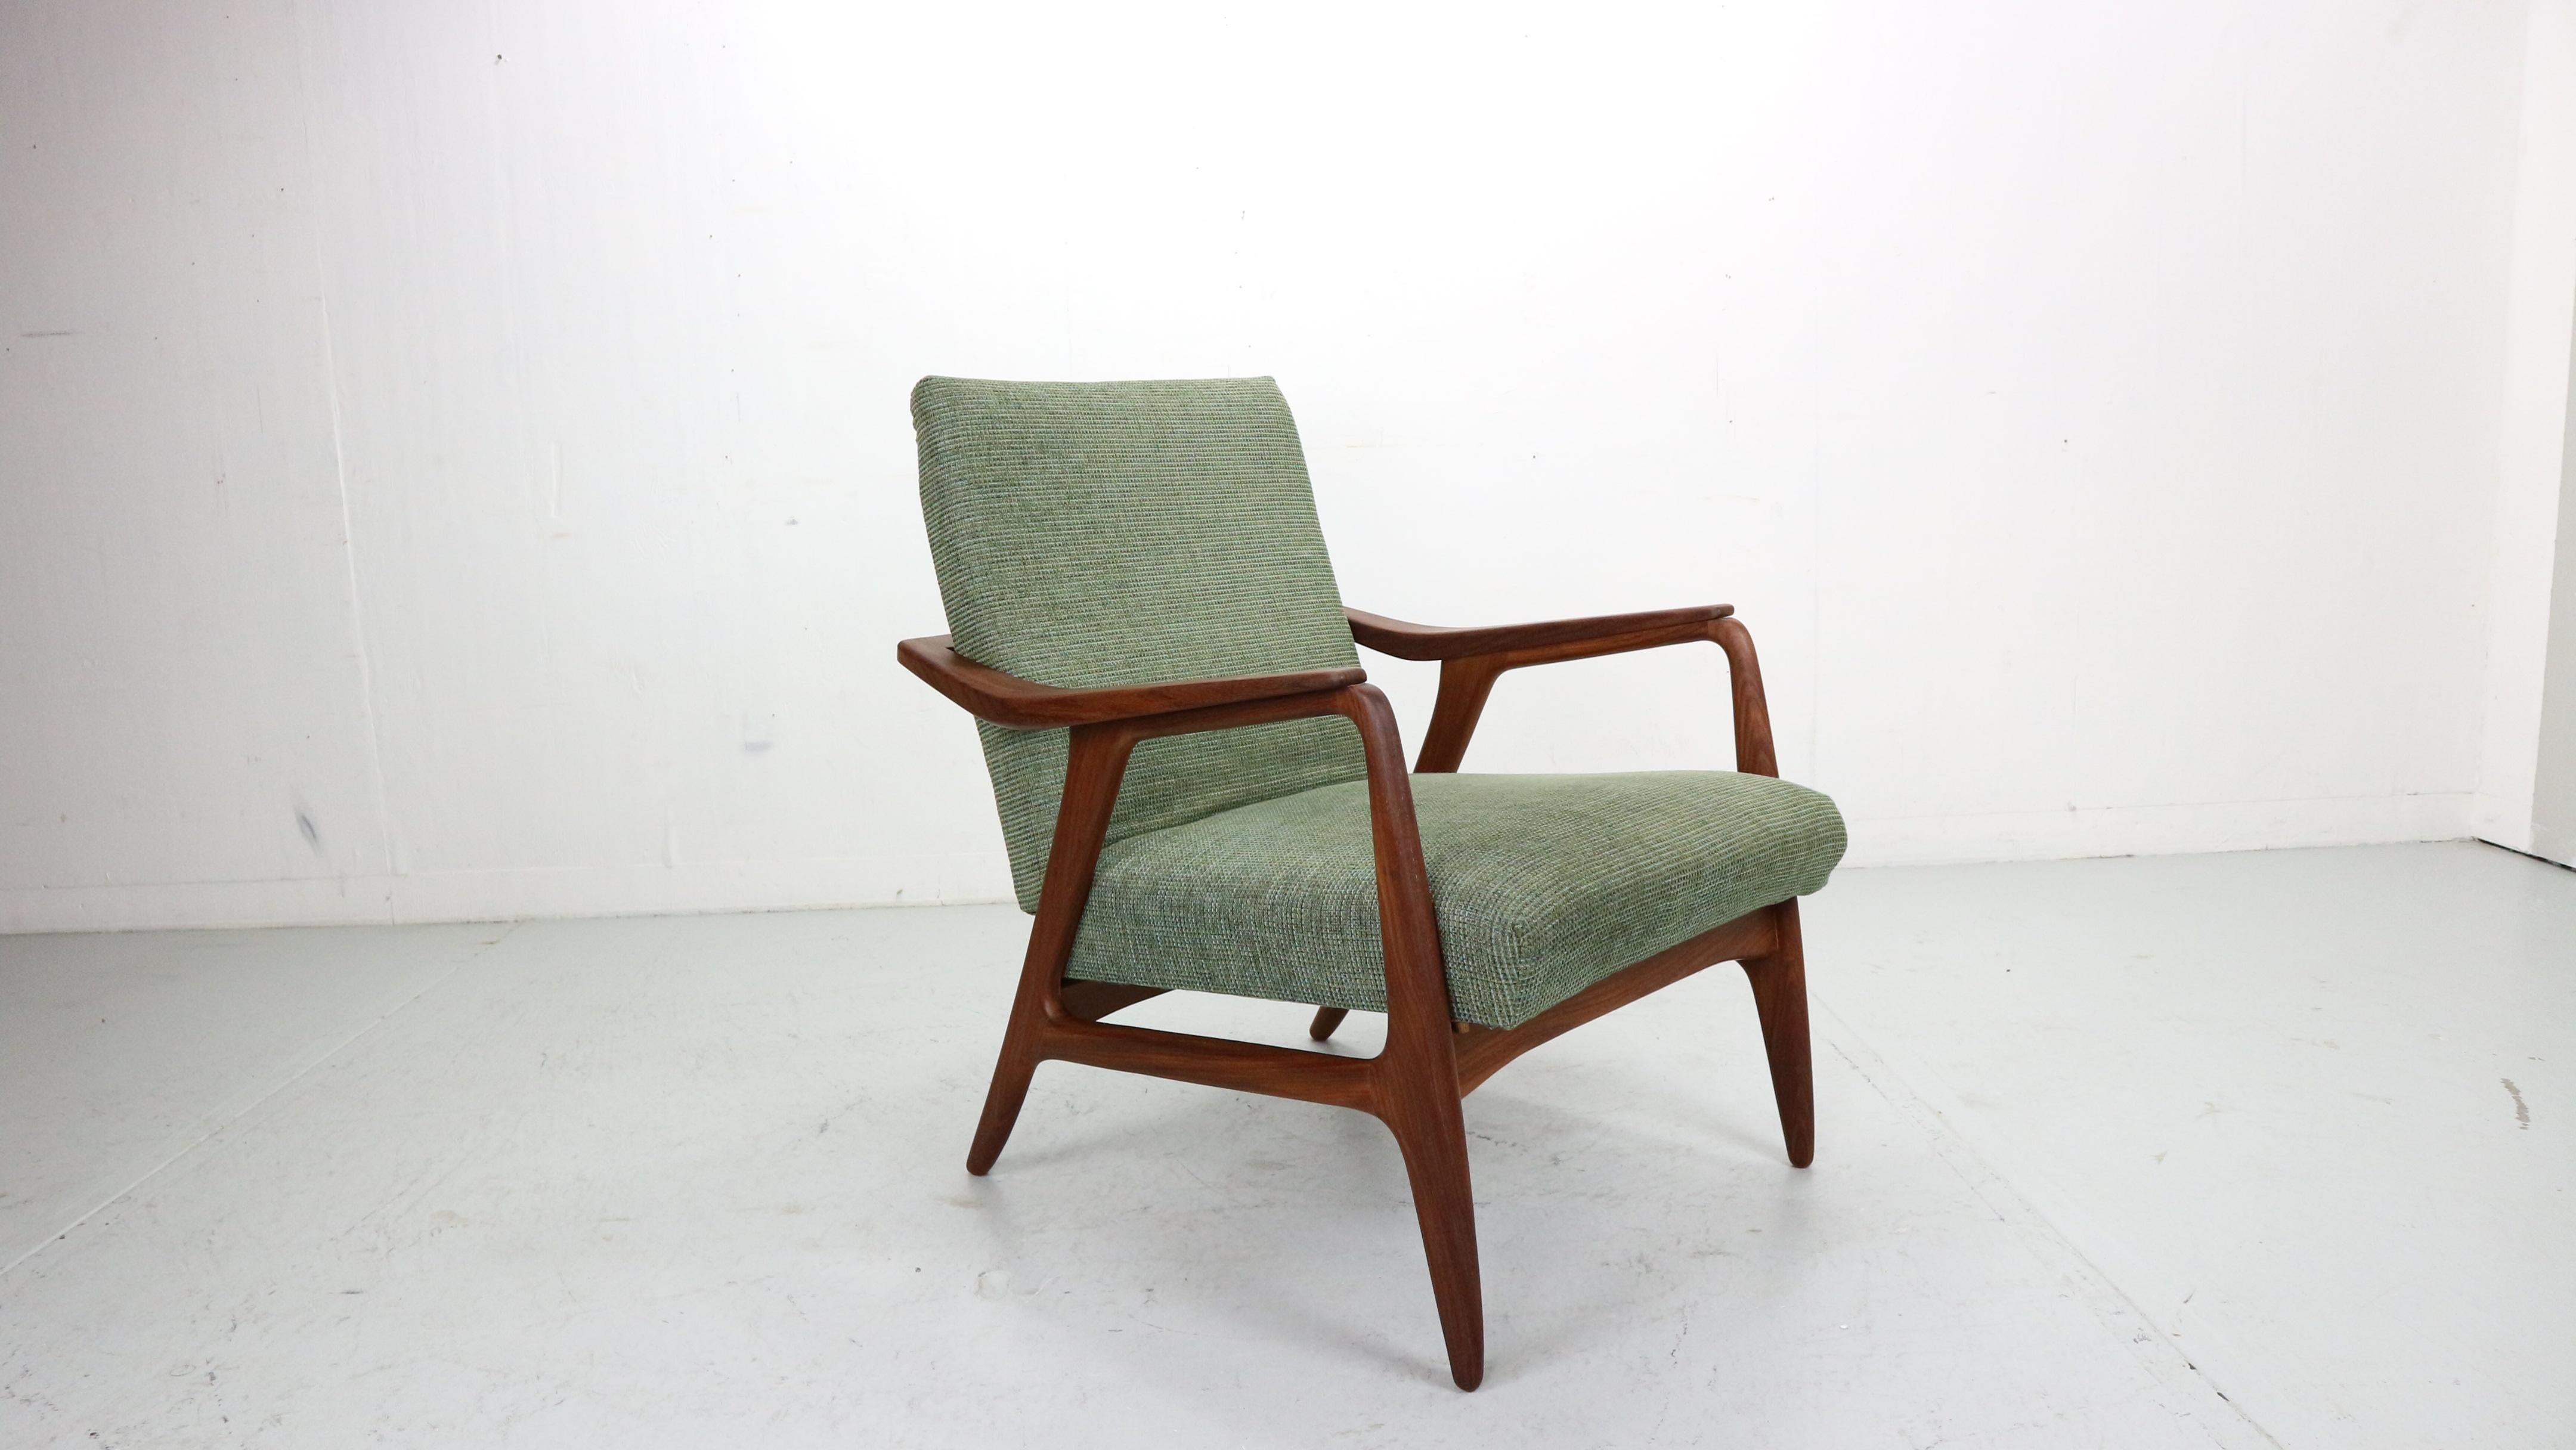 Lovely set of two matching  lounge chairs, designed and fabricated in the 1960s in Denmark.

The elegant structure of this comfortable chair is made of solid teak.
Ask us for the best shipping price